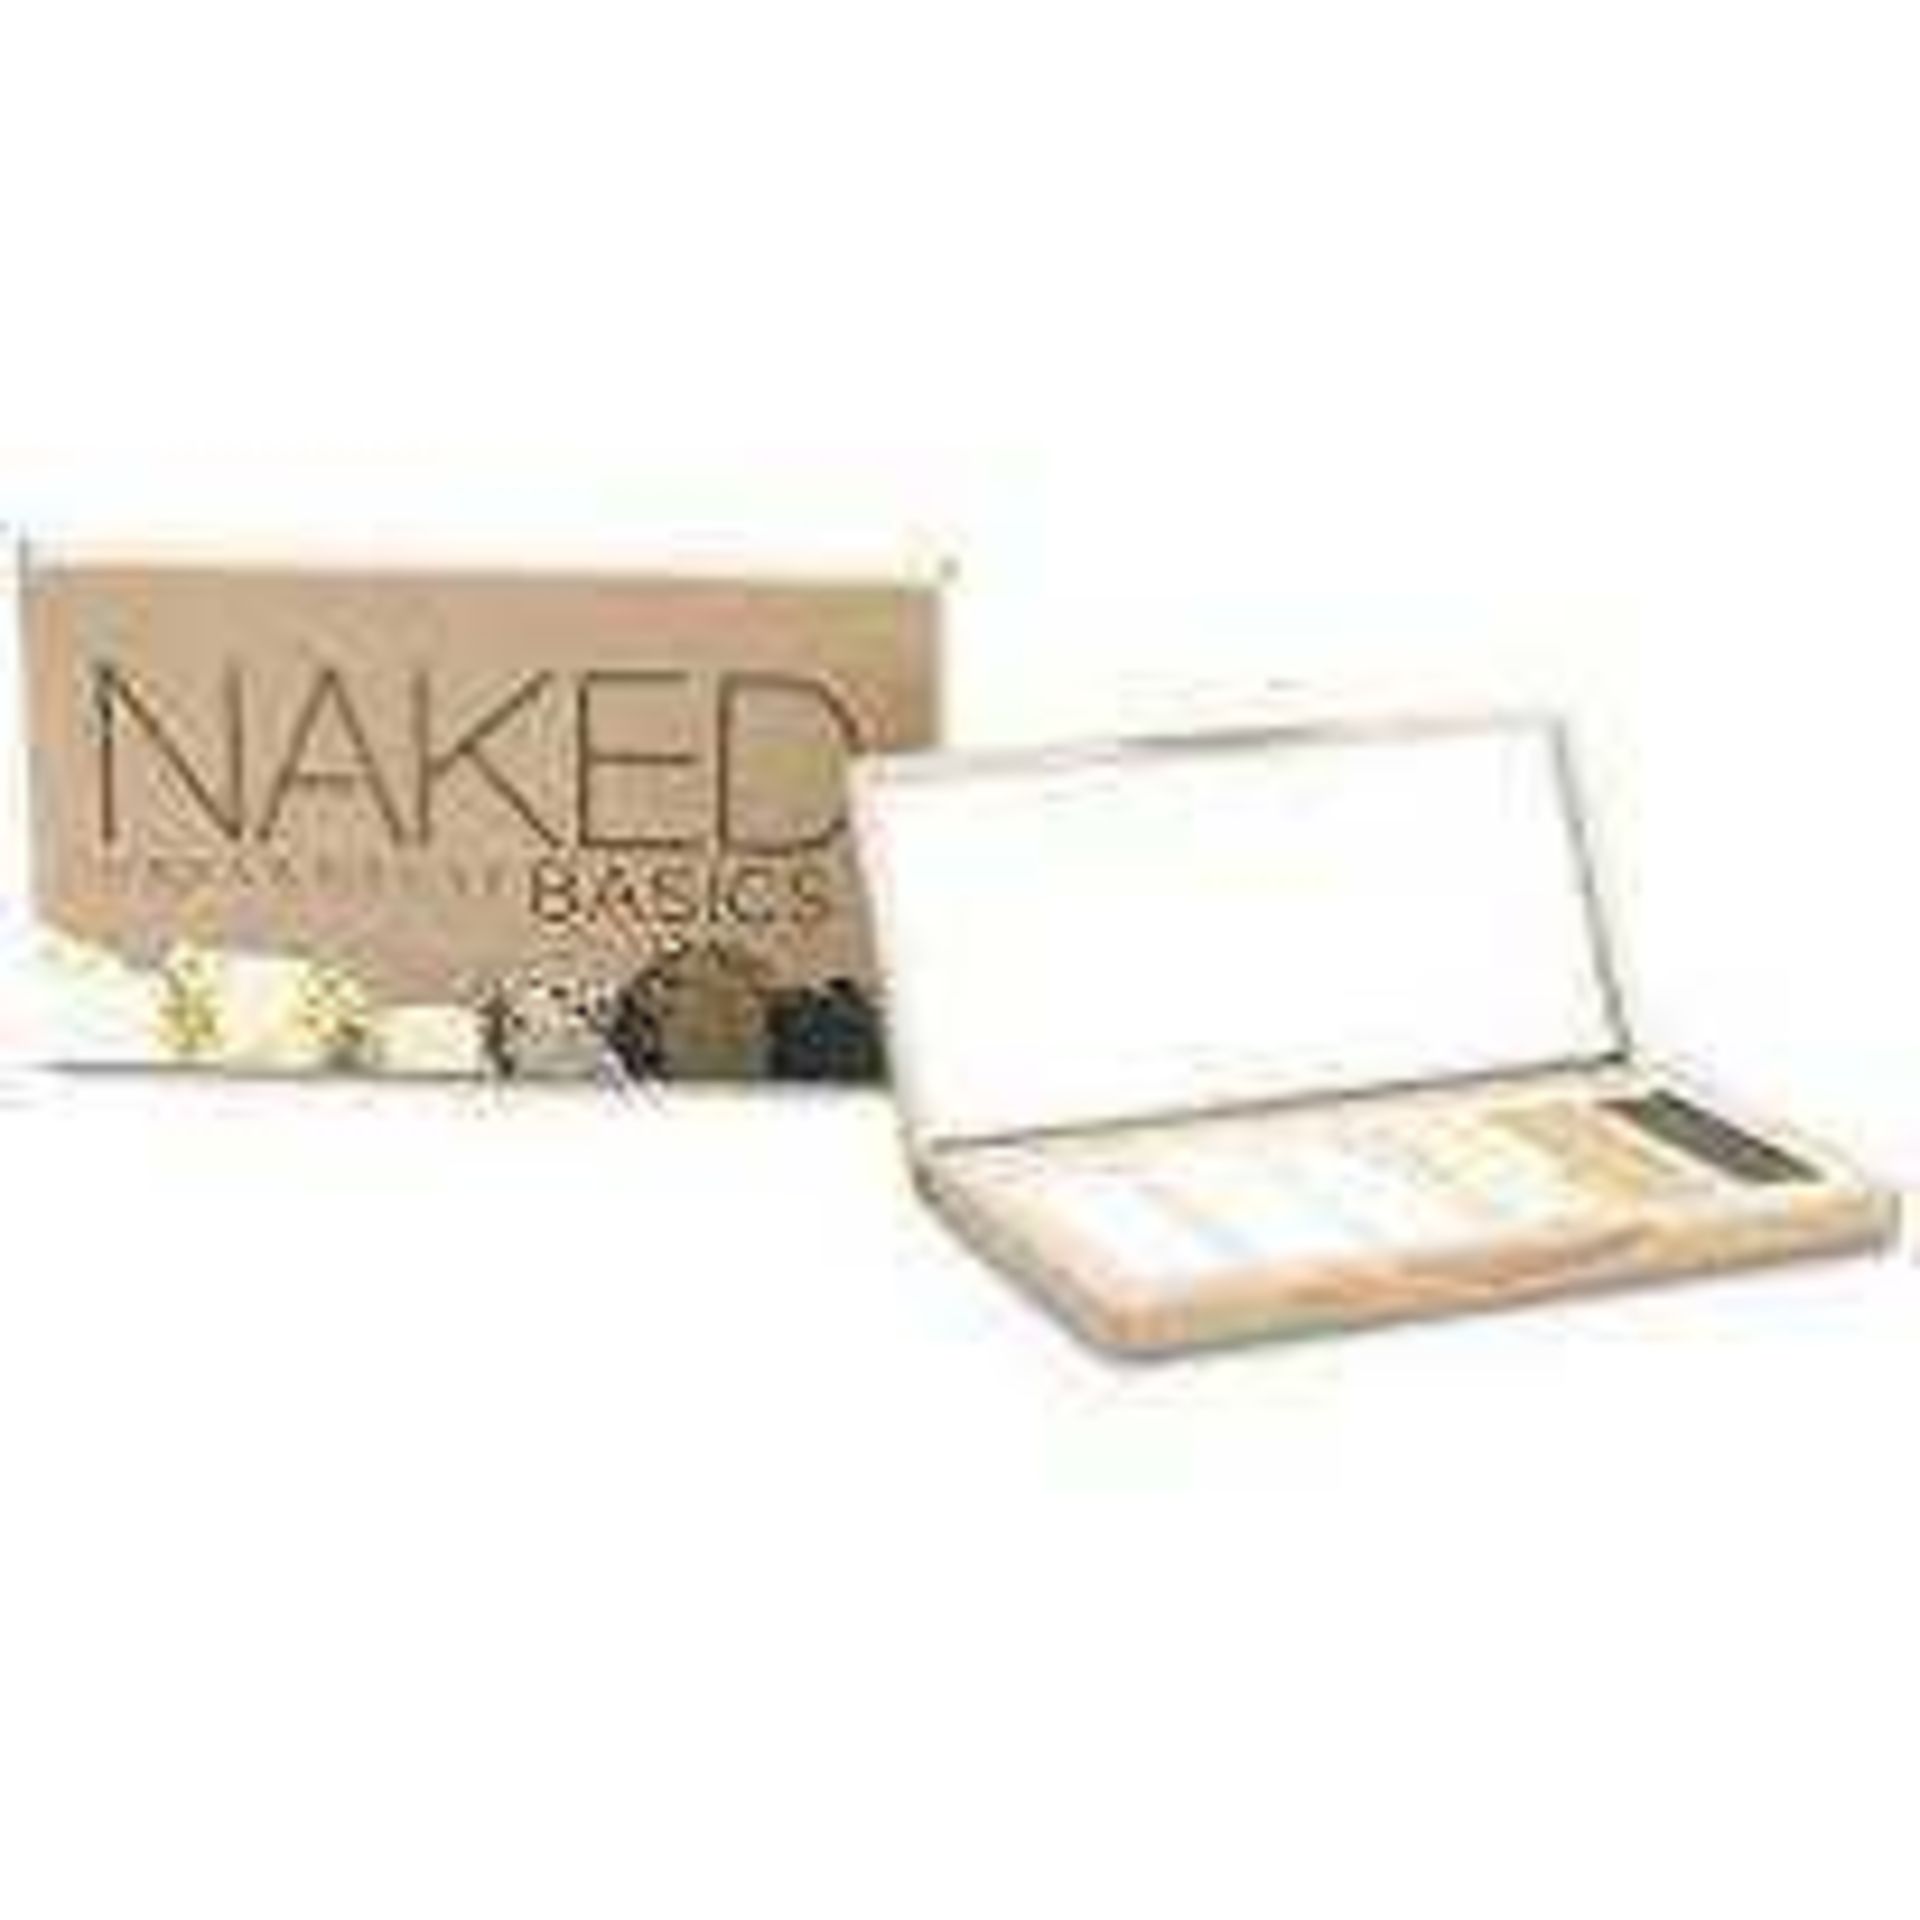 RRP £30 Each Boxed Assorted Urban Decay Eyeshadow Palettes On The Run And Naked Basics - Image 2 of 2